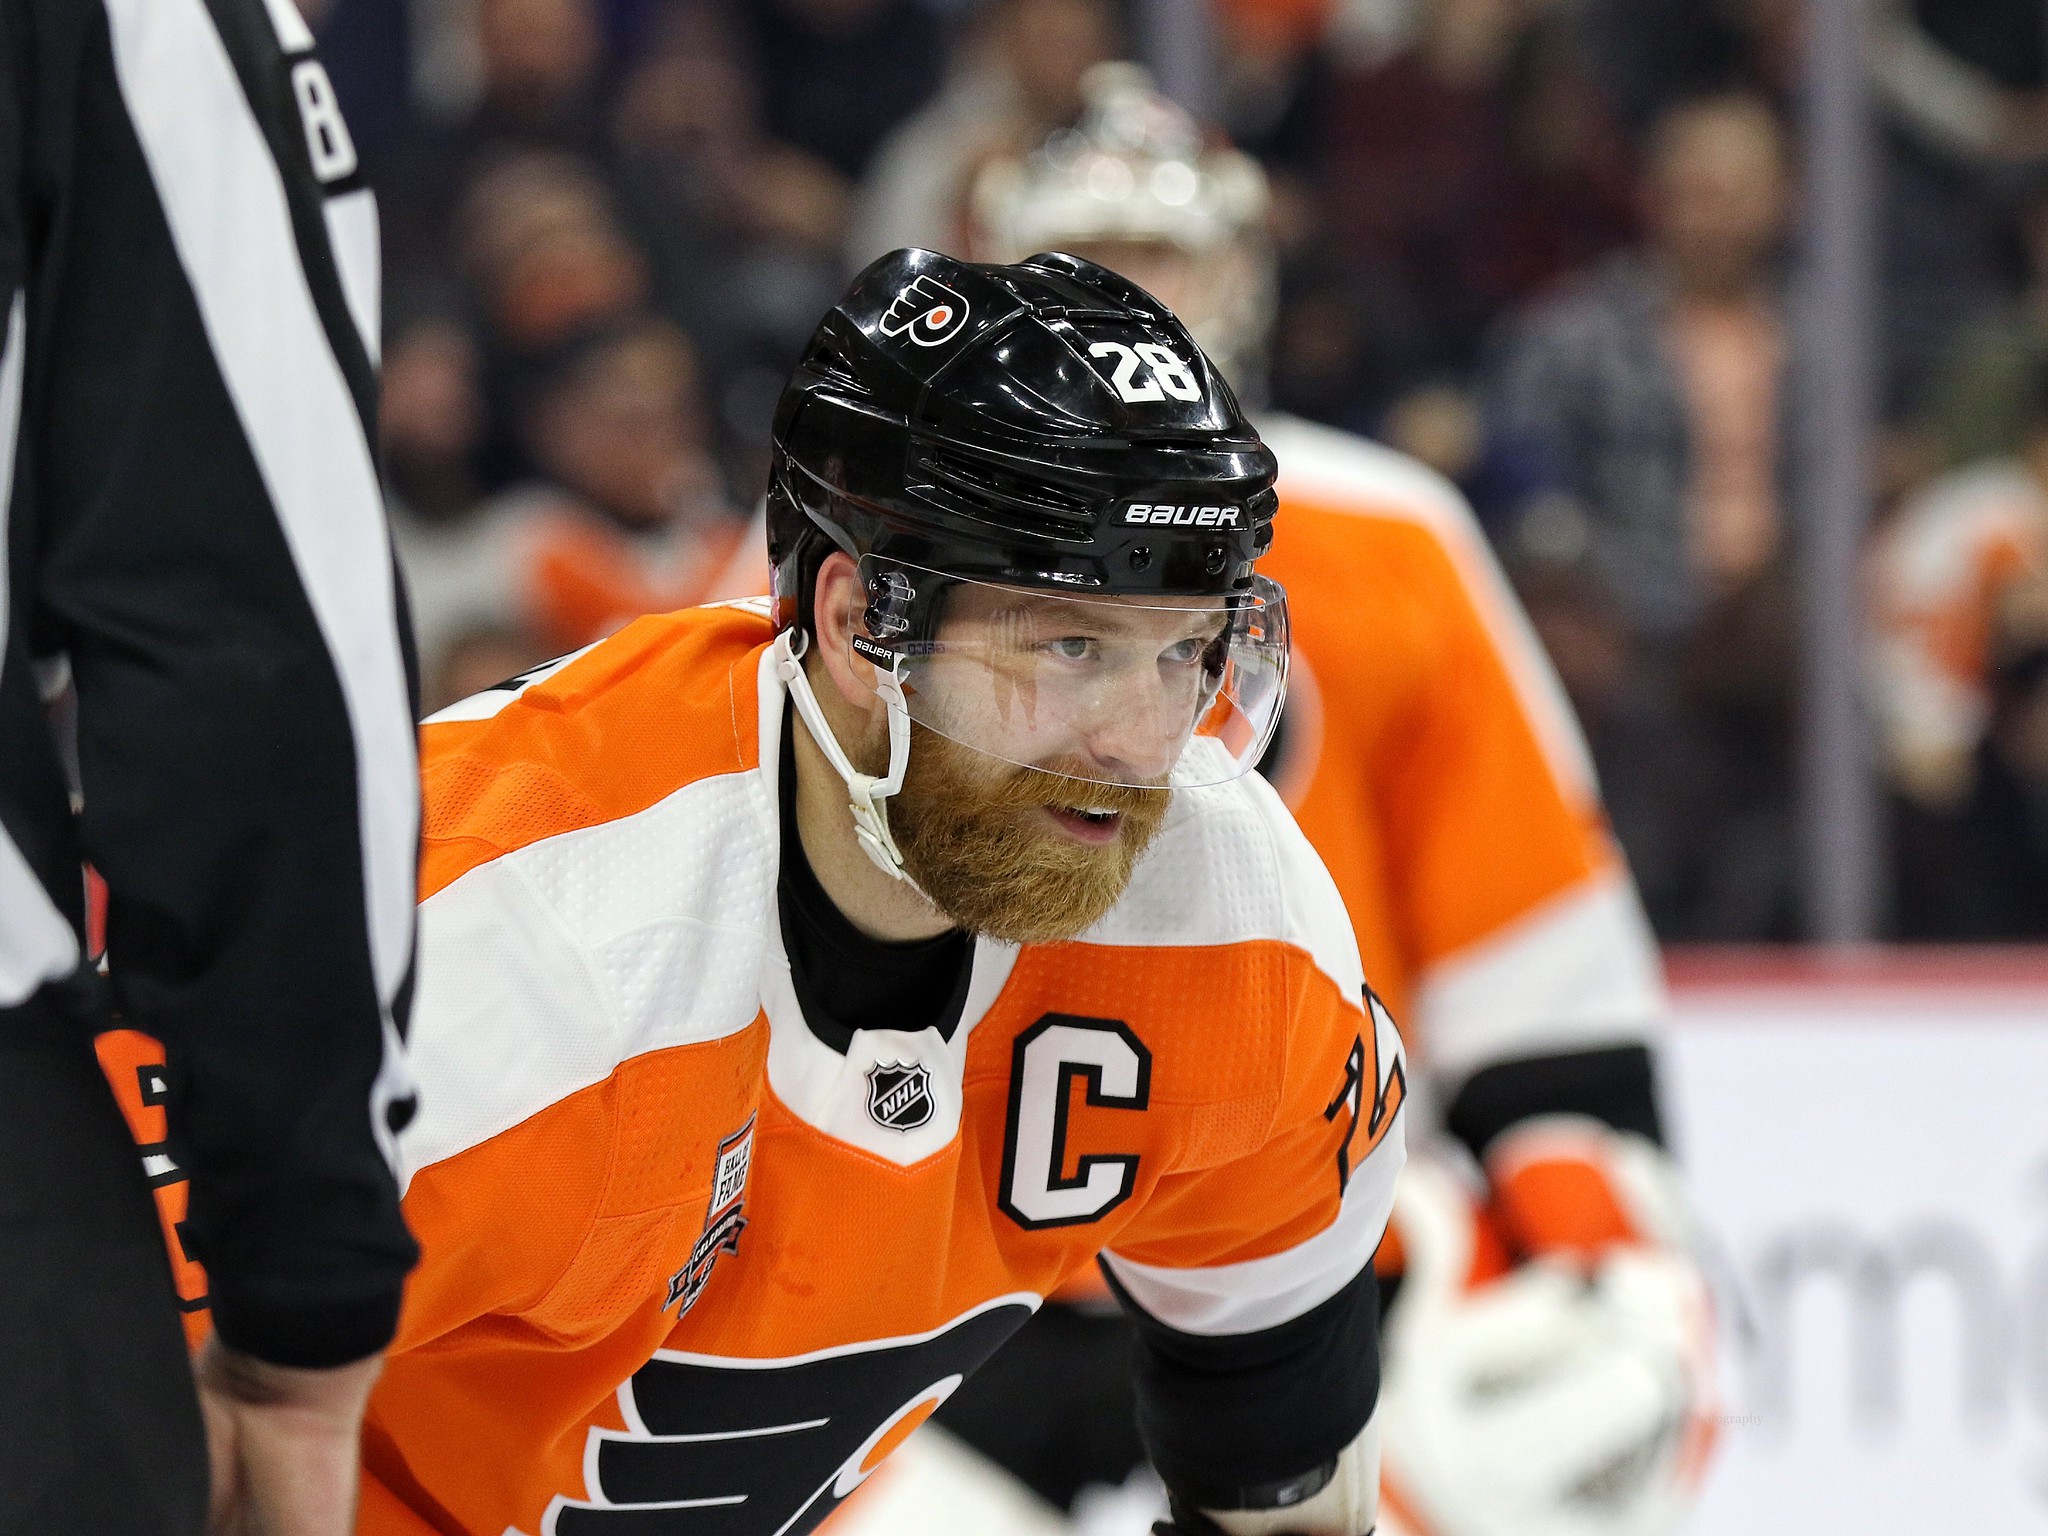 Former Flyer Claude Giroux signs as free agent with Ottawa Senators